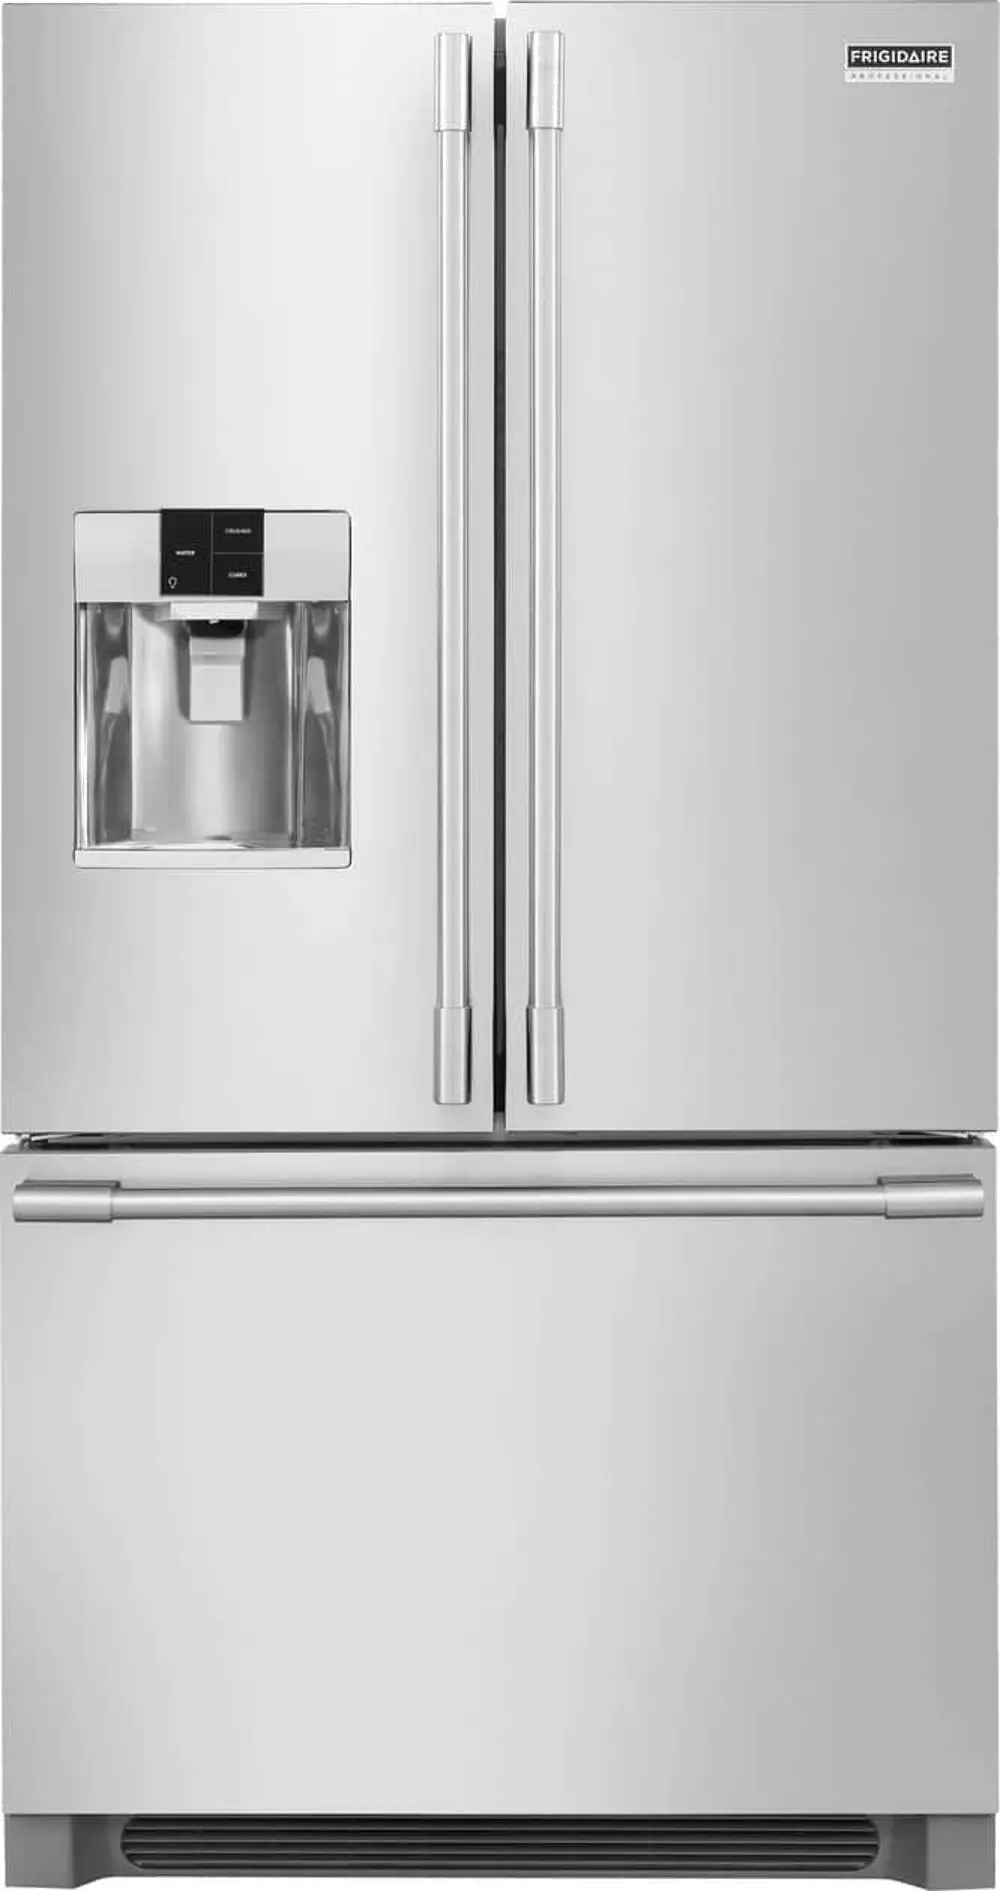 FPBC2278UF Frigidaire Professional 21.6 cu ft French Door Refrigerator - Counter Depth Stainless Steel-1